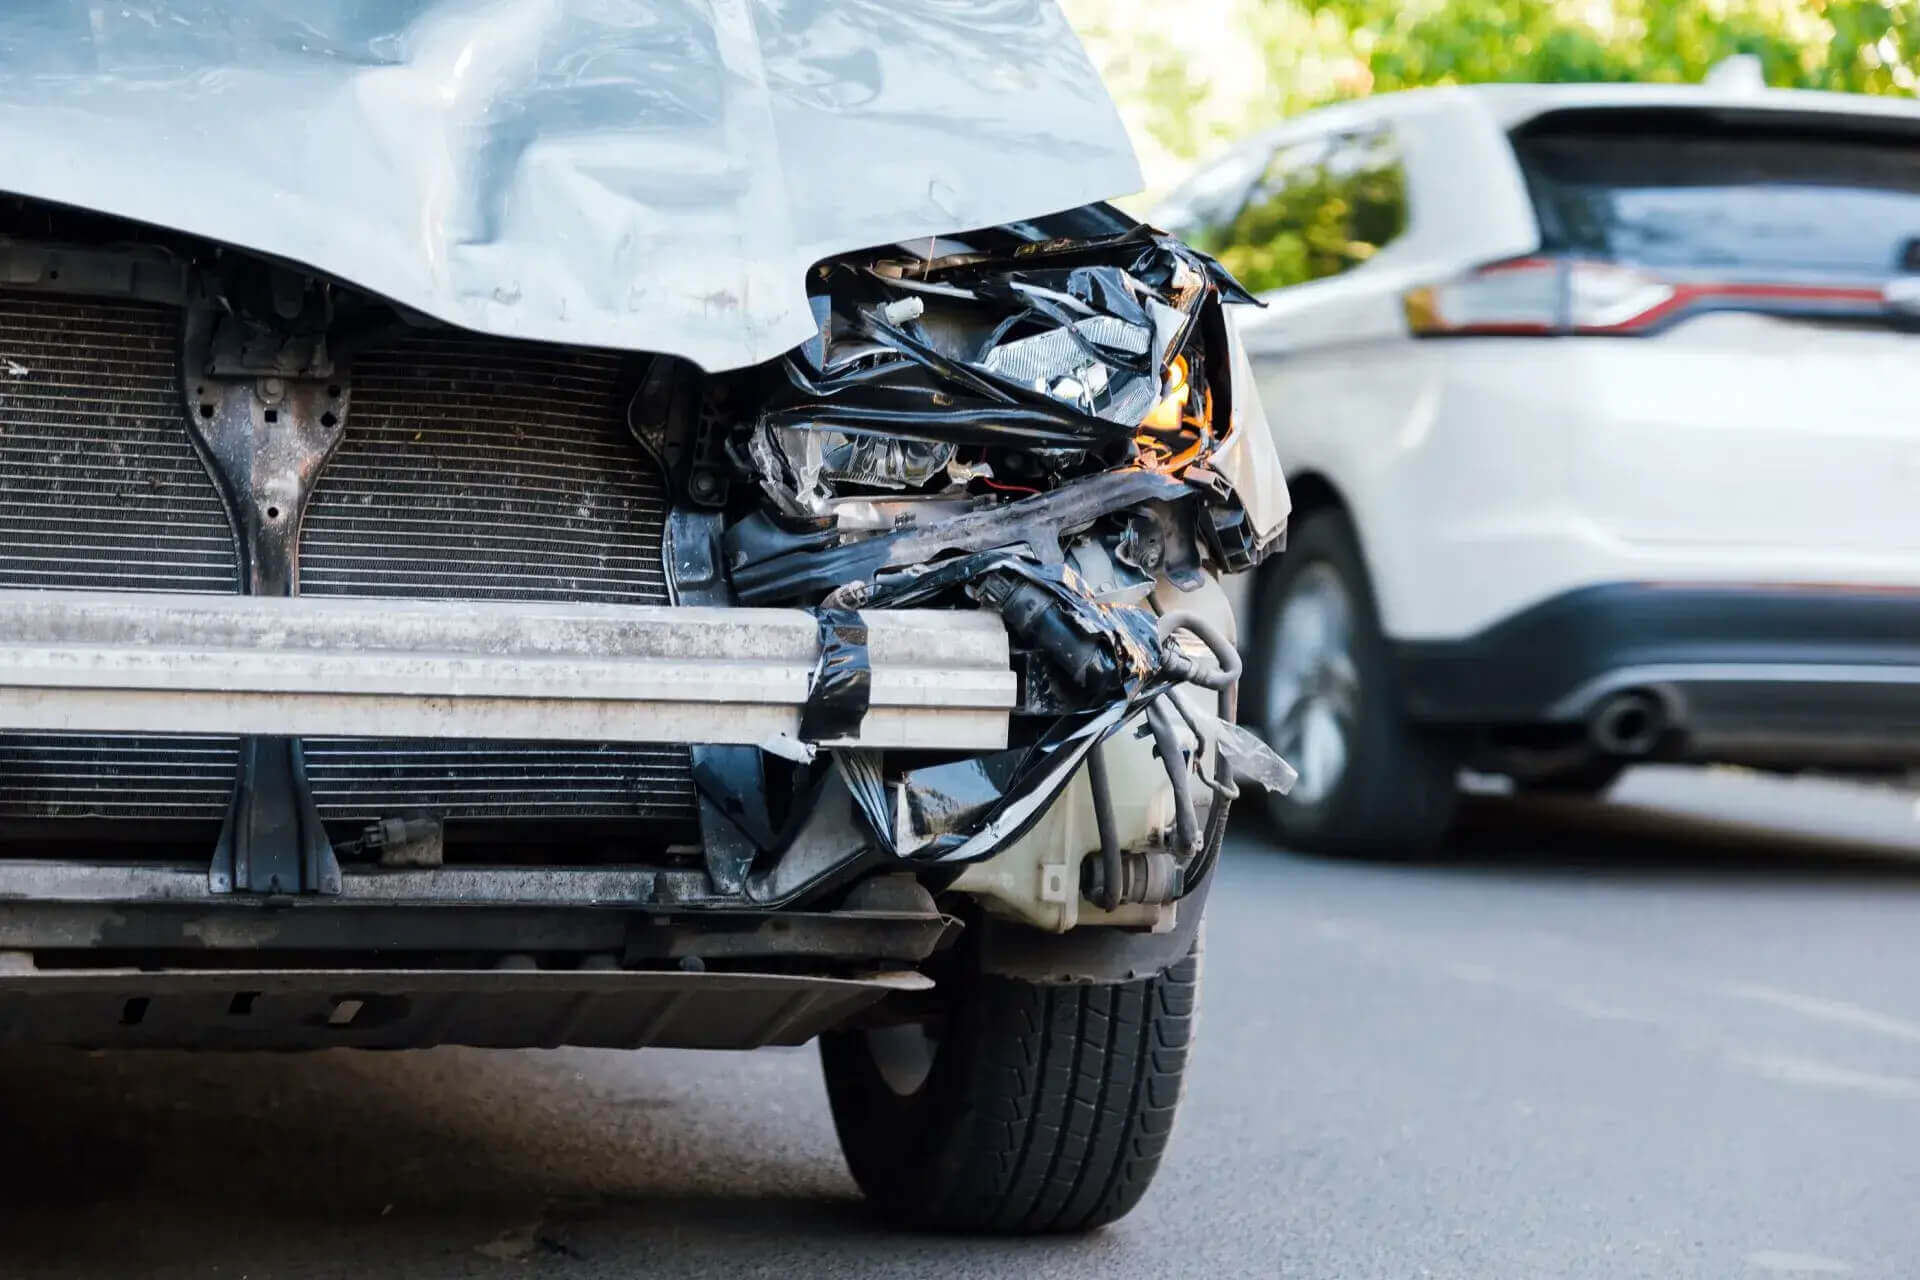 Six Steps To Take Immediately After A Hit-and-run Accident